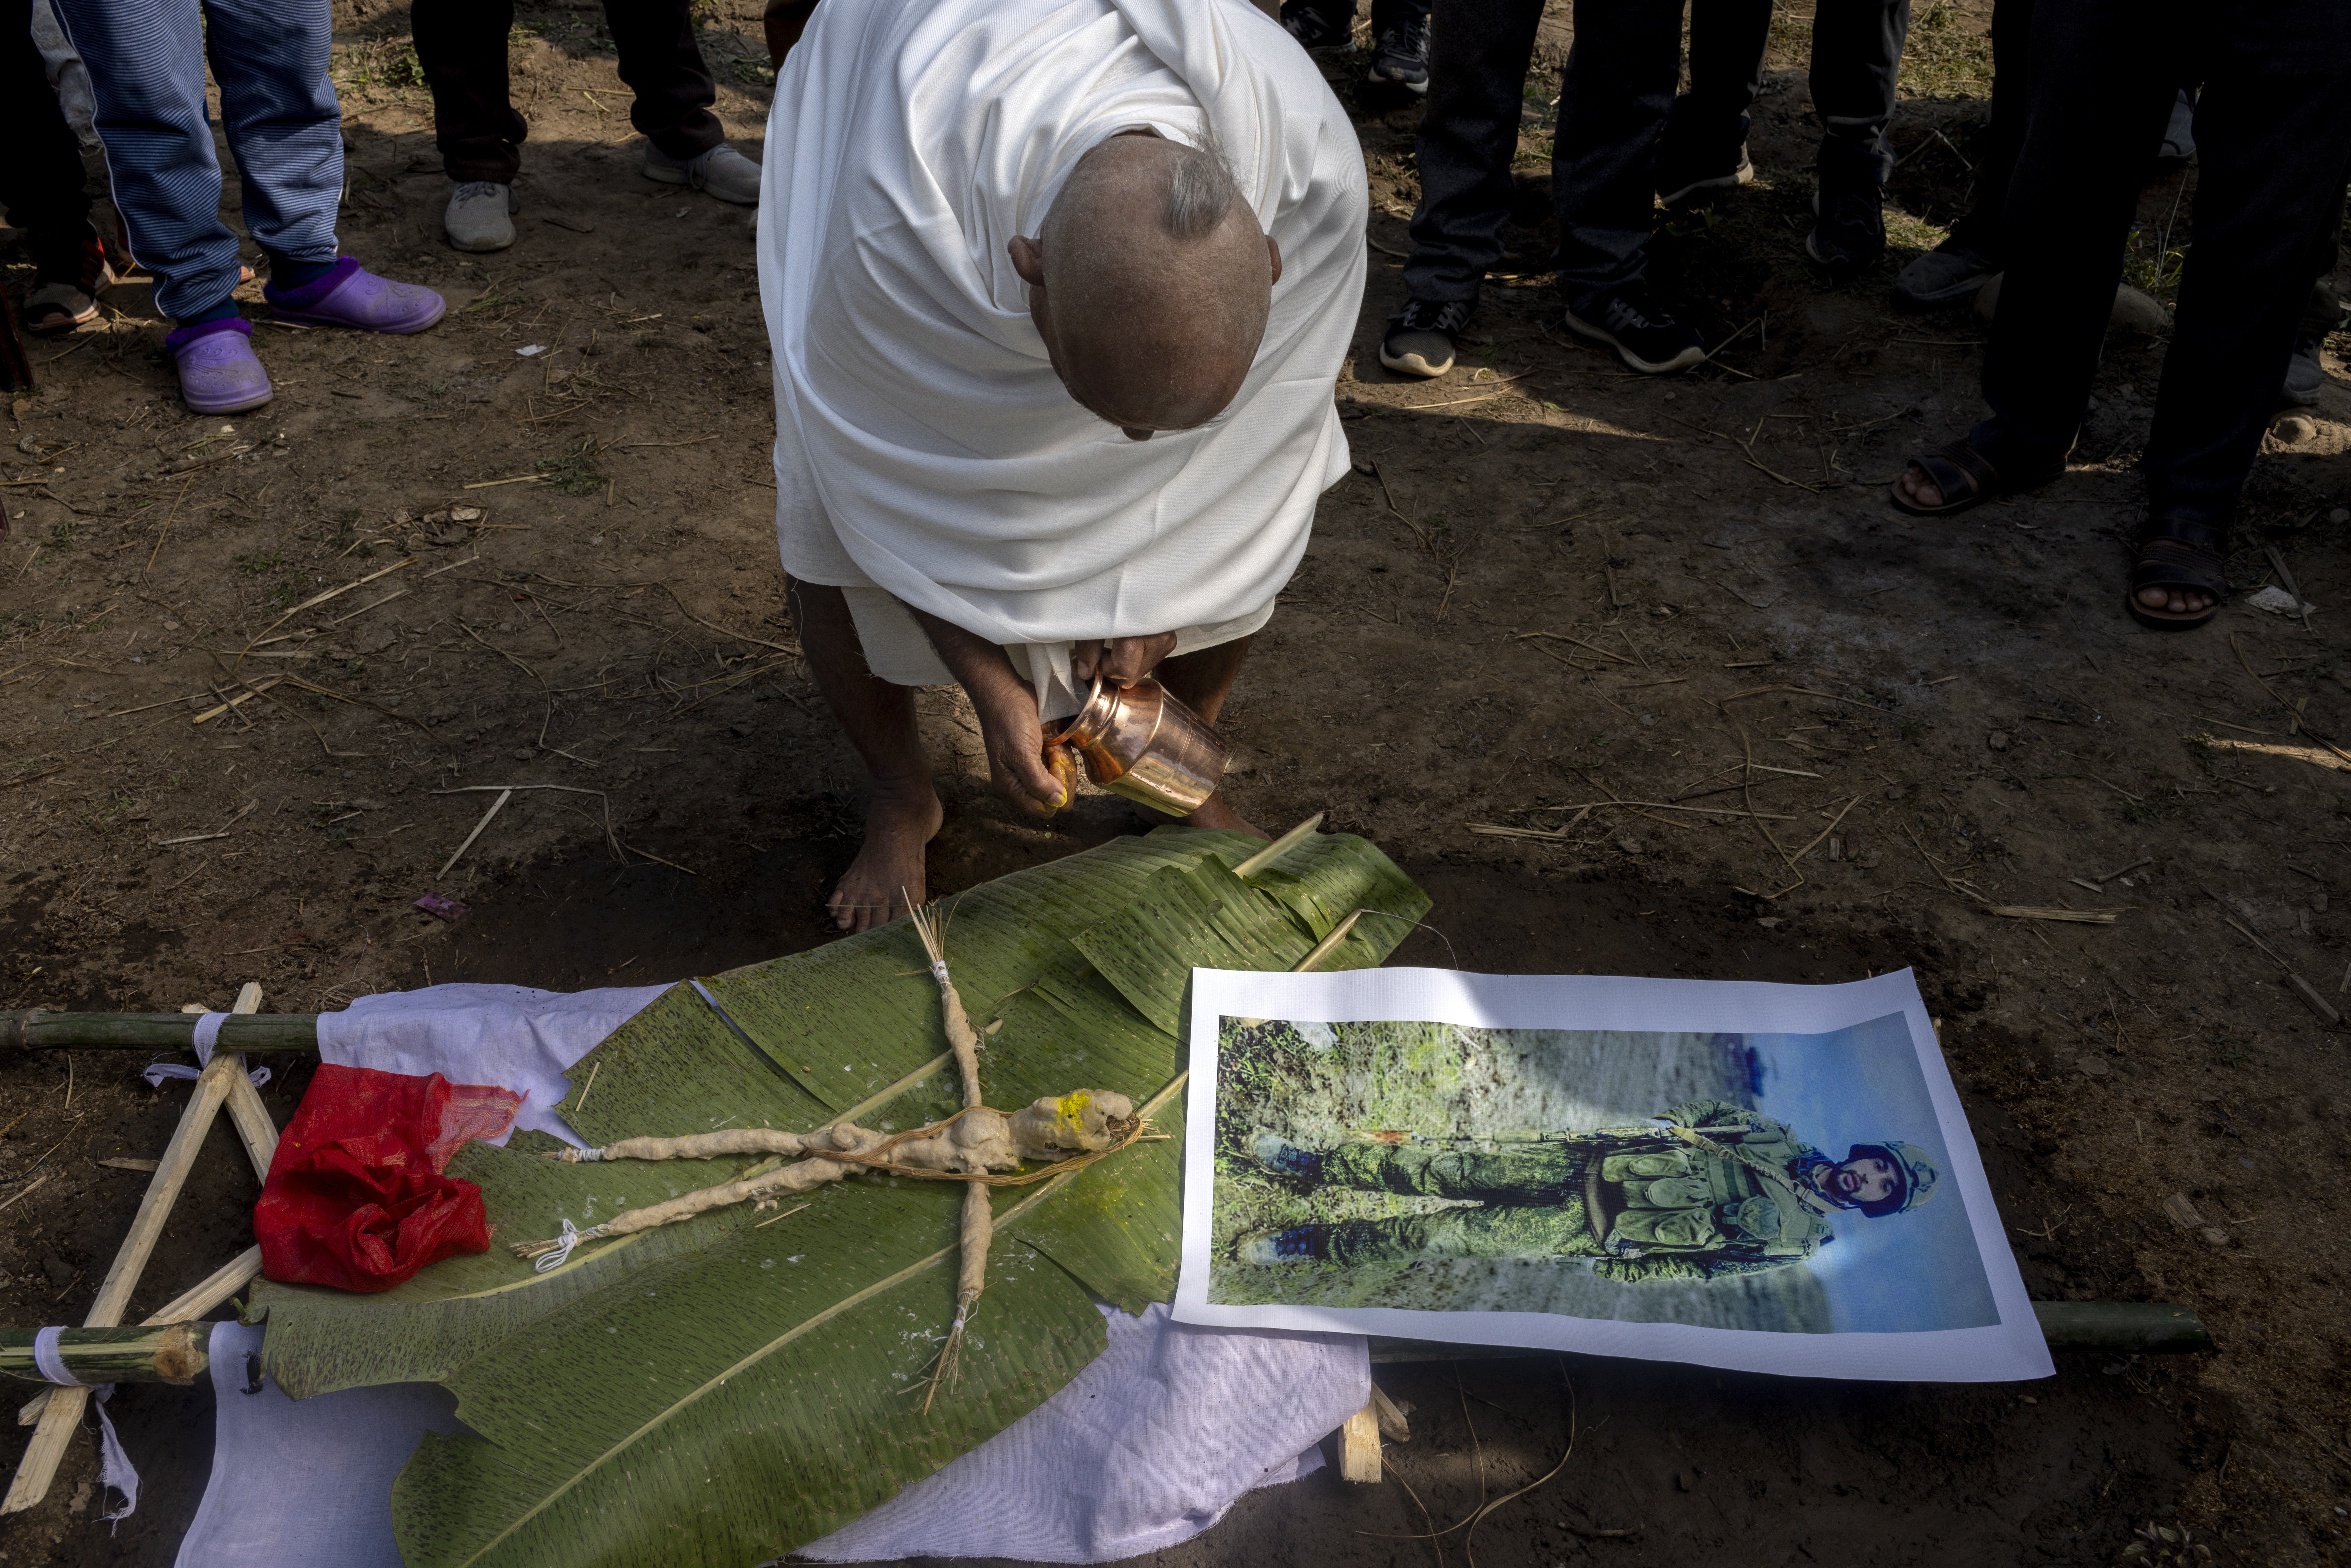 Gangadhar Paudel, an uncle of the deceased Hari Aryal, is dressed in white attire with a shaven head, as he starts Hari’s final rites procession in Walling, Syangja district, Nepal